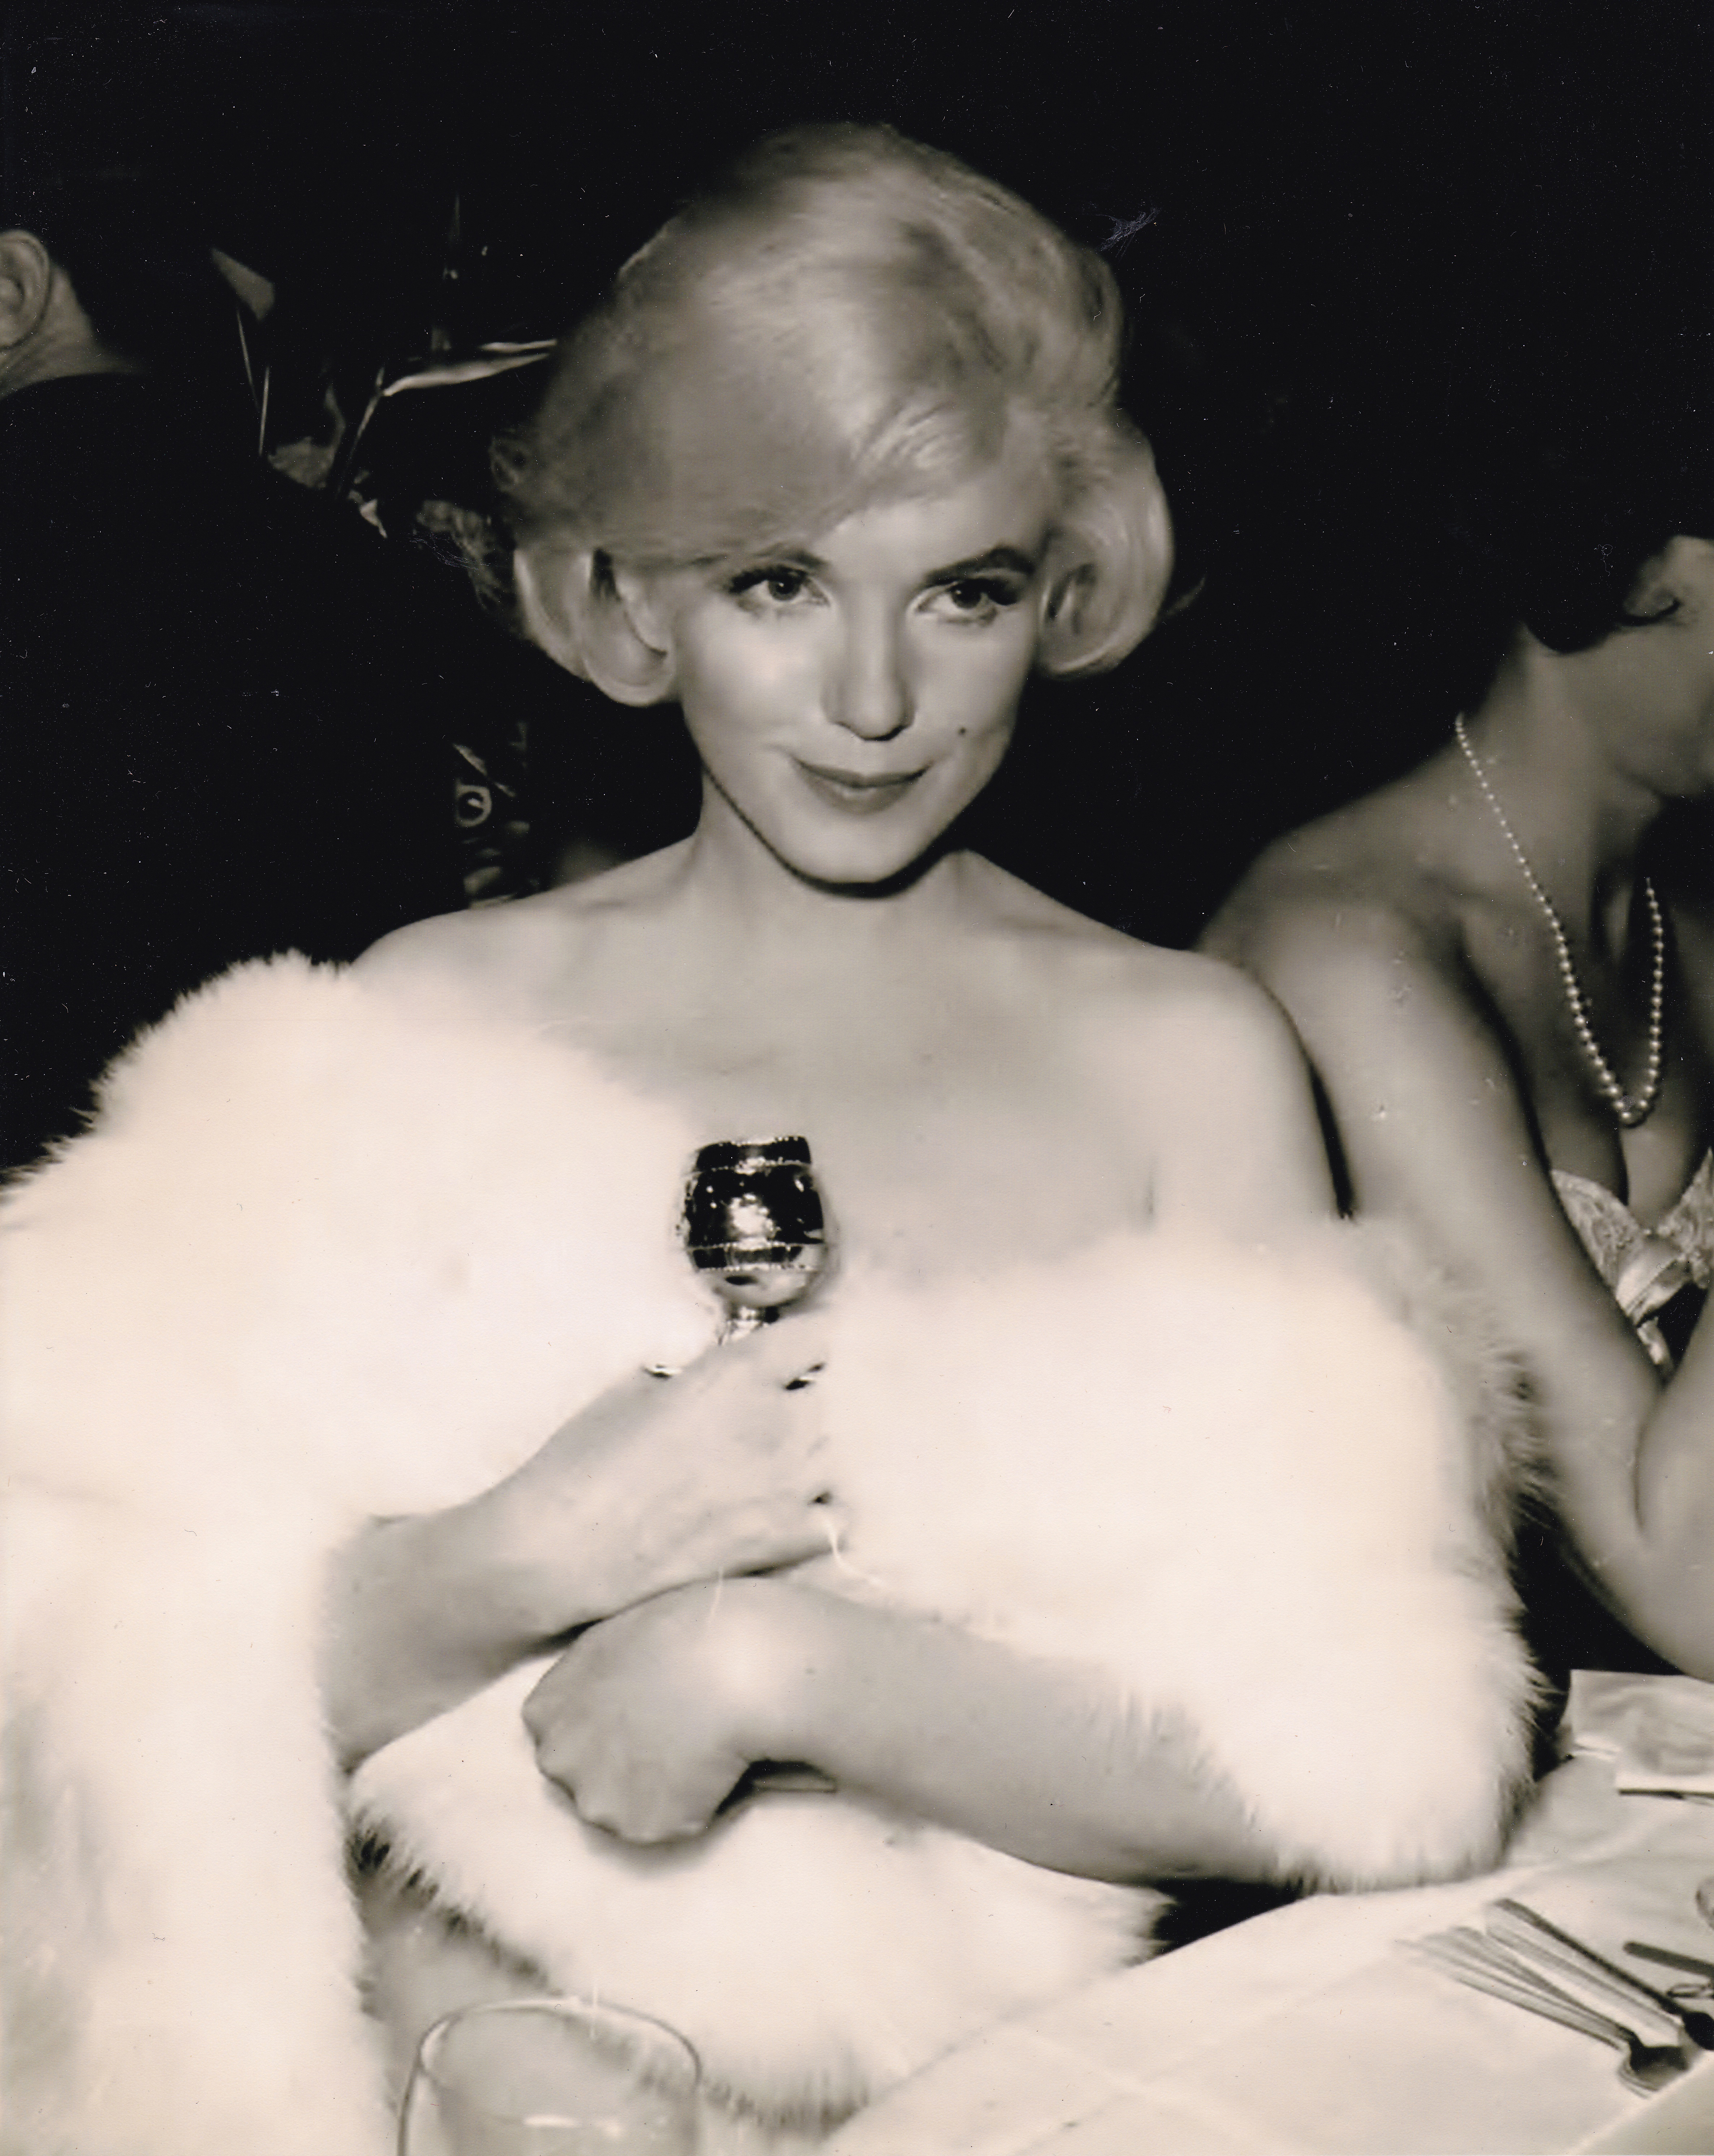 1960 Marilyn Monroe (Best Actress comedy-Some Like It Hot)